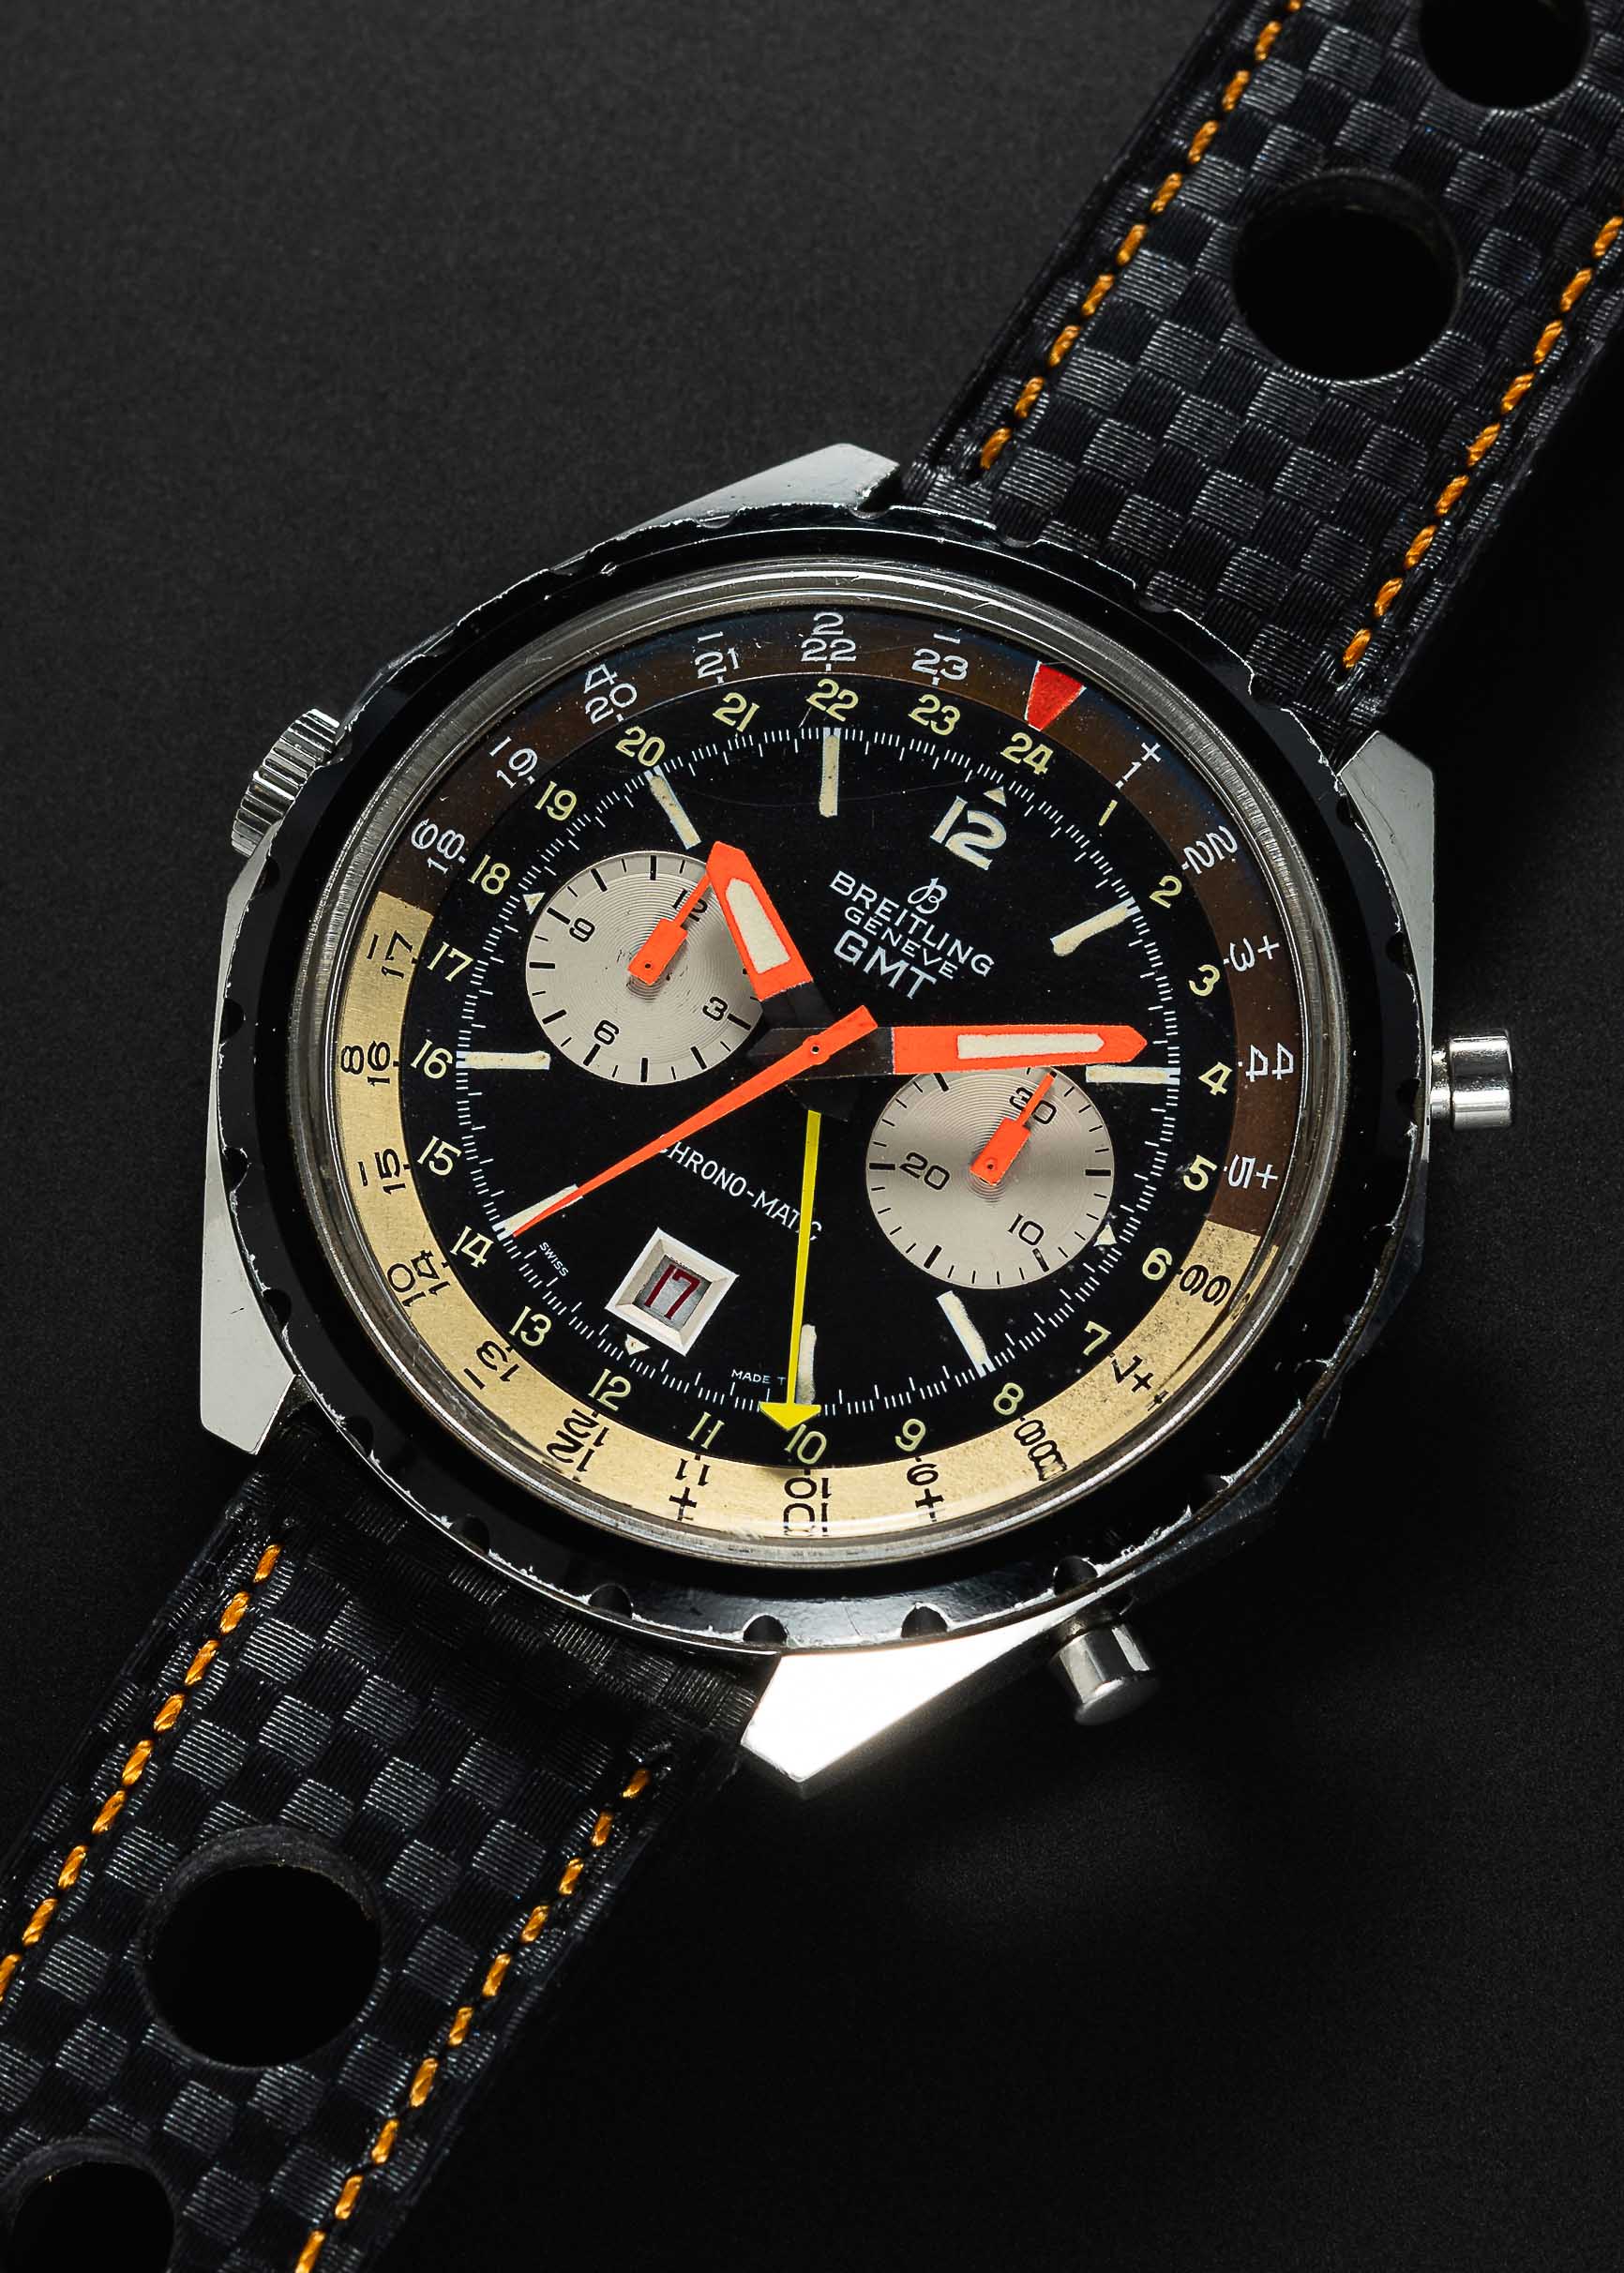 A RARE GENTLEMAN'S STAINLESS STEEL BREITLING GMT CHRONO-MATIC CHRONOGRAPH WRIST WATCH CIRCA 1970,